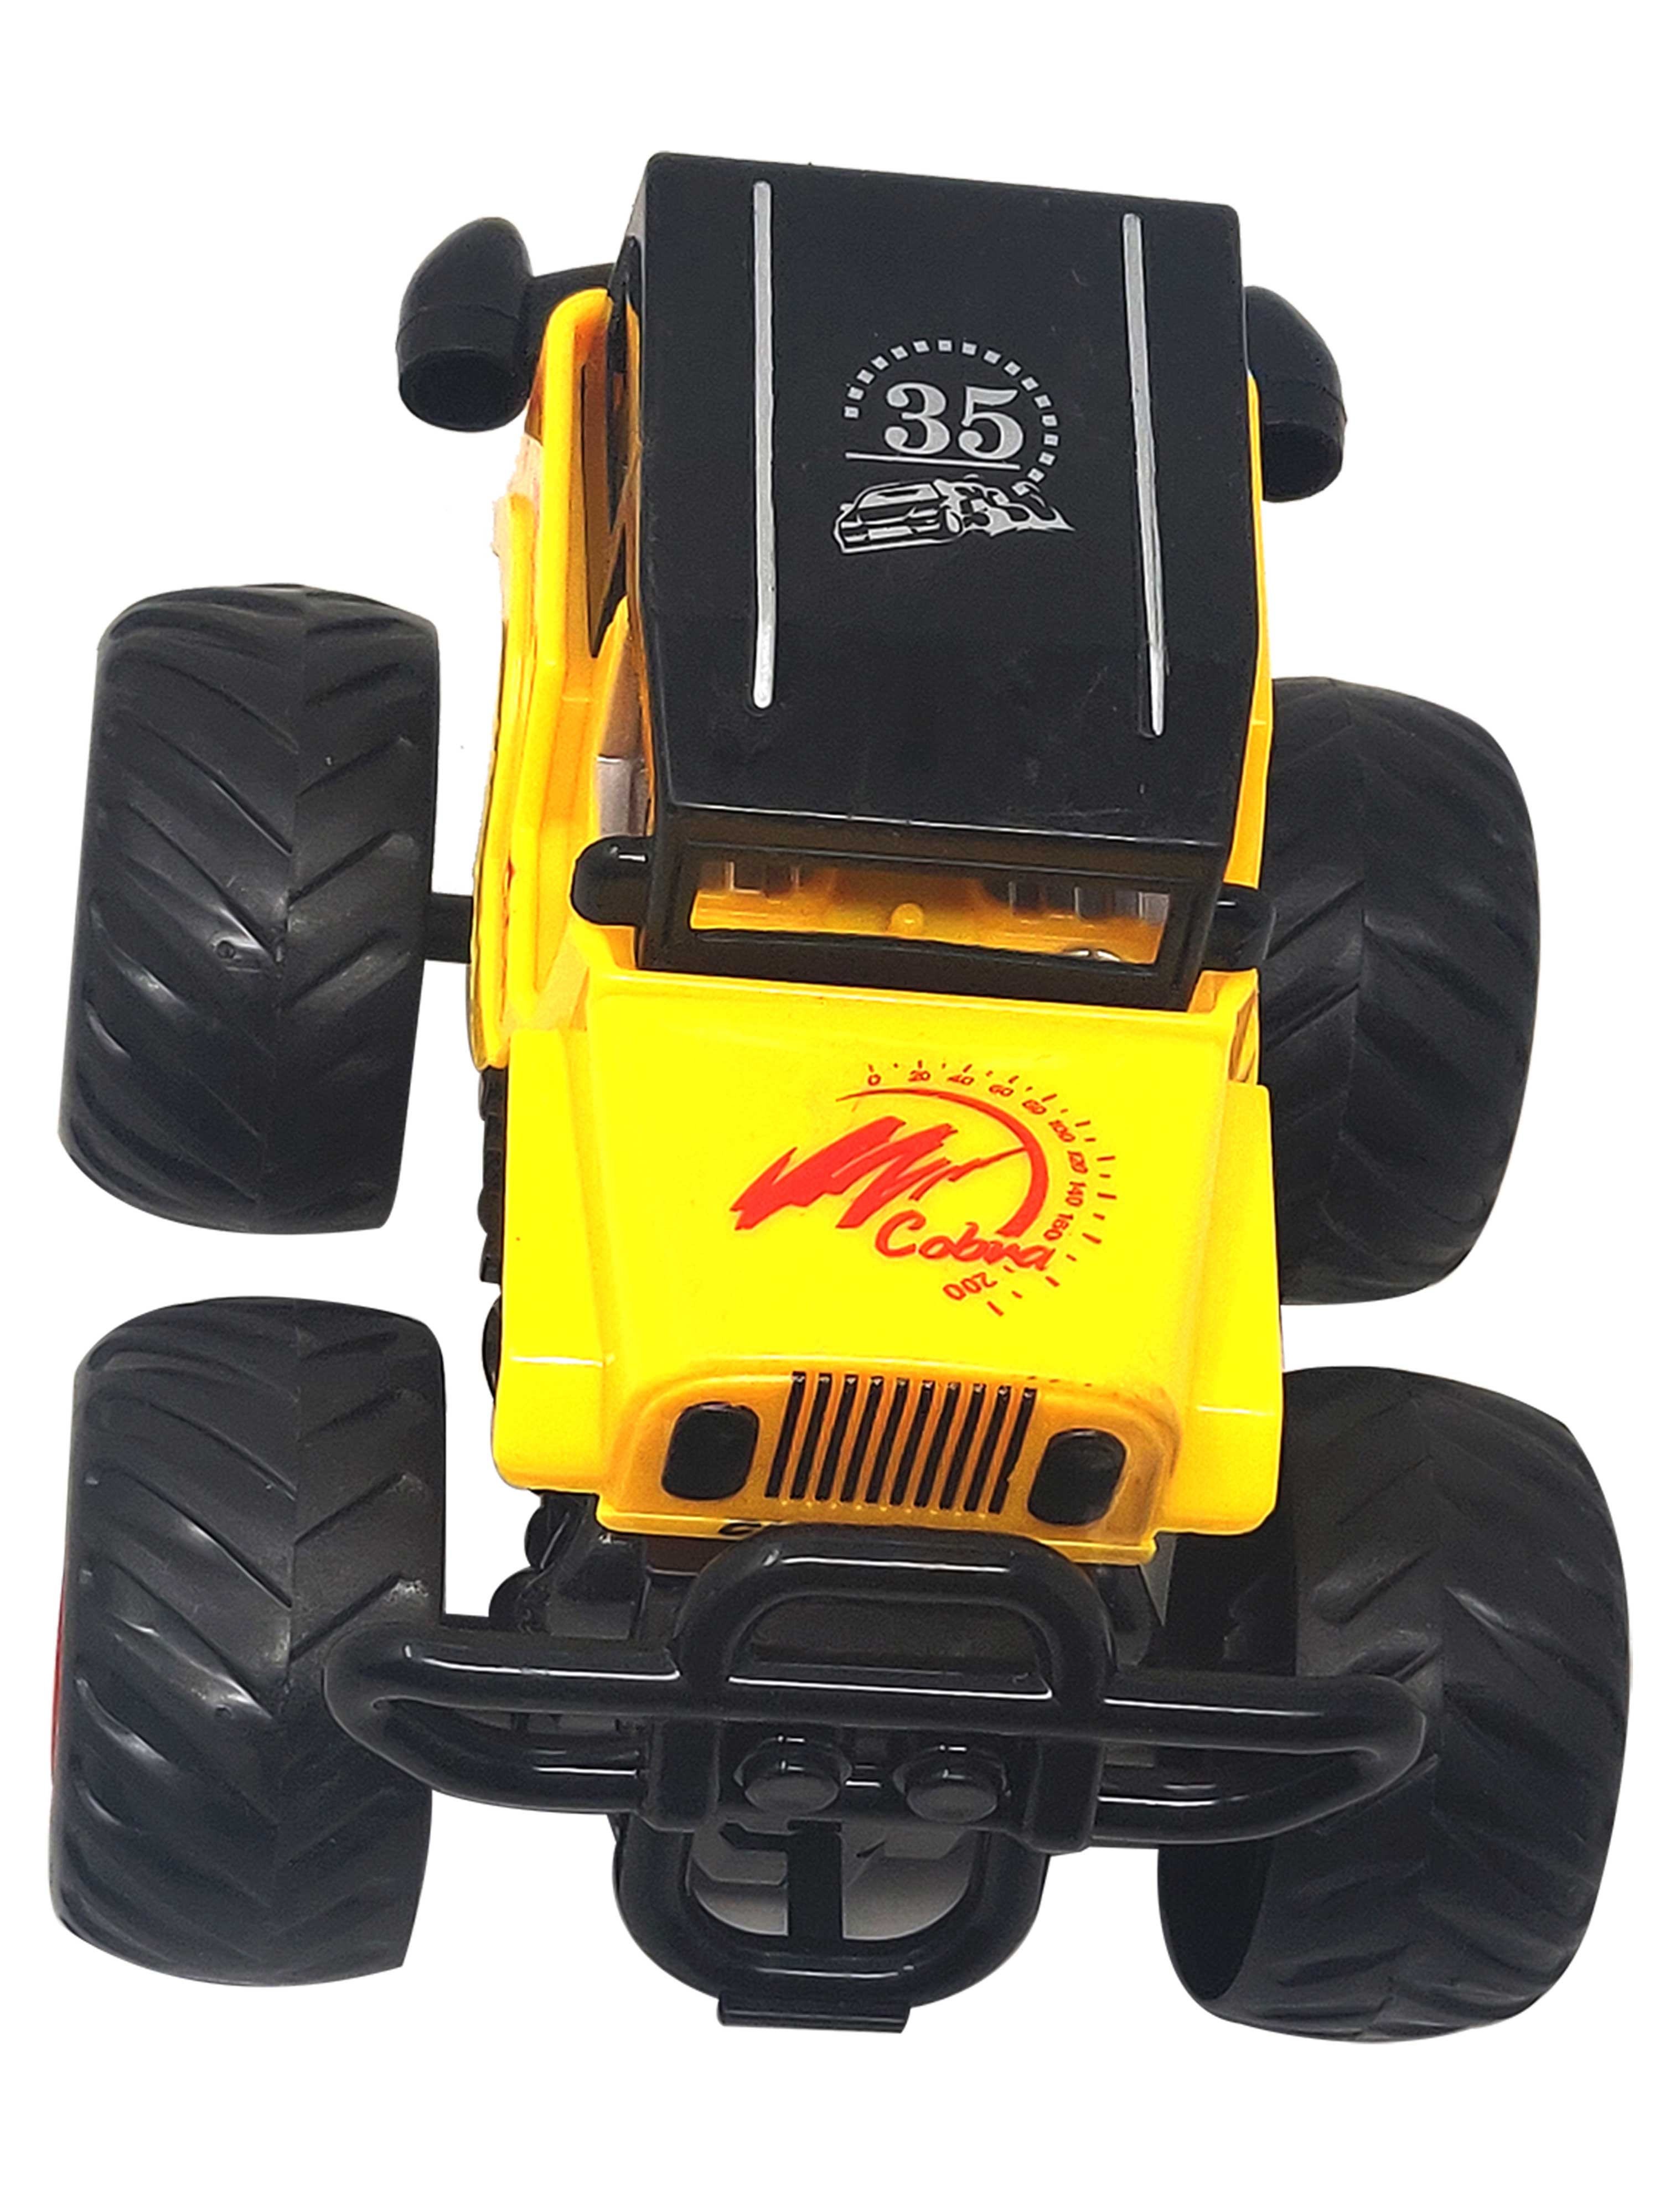 Friction Cars-Jeep-Yellow